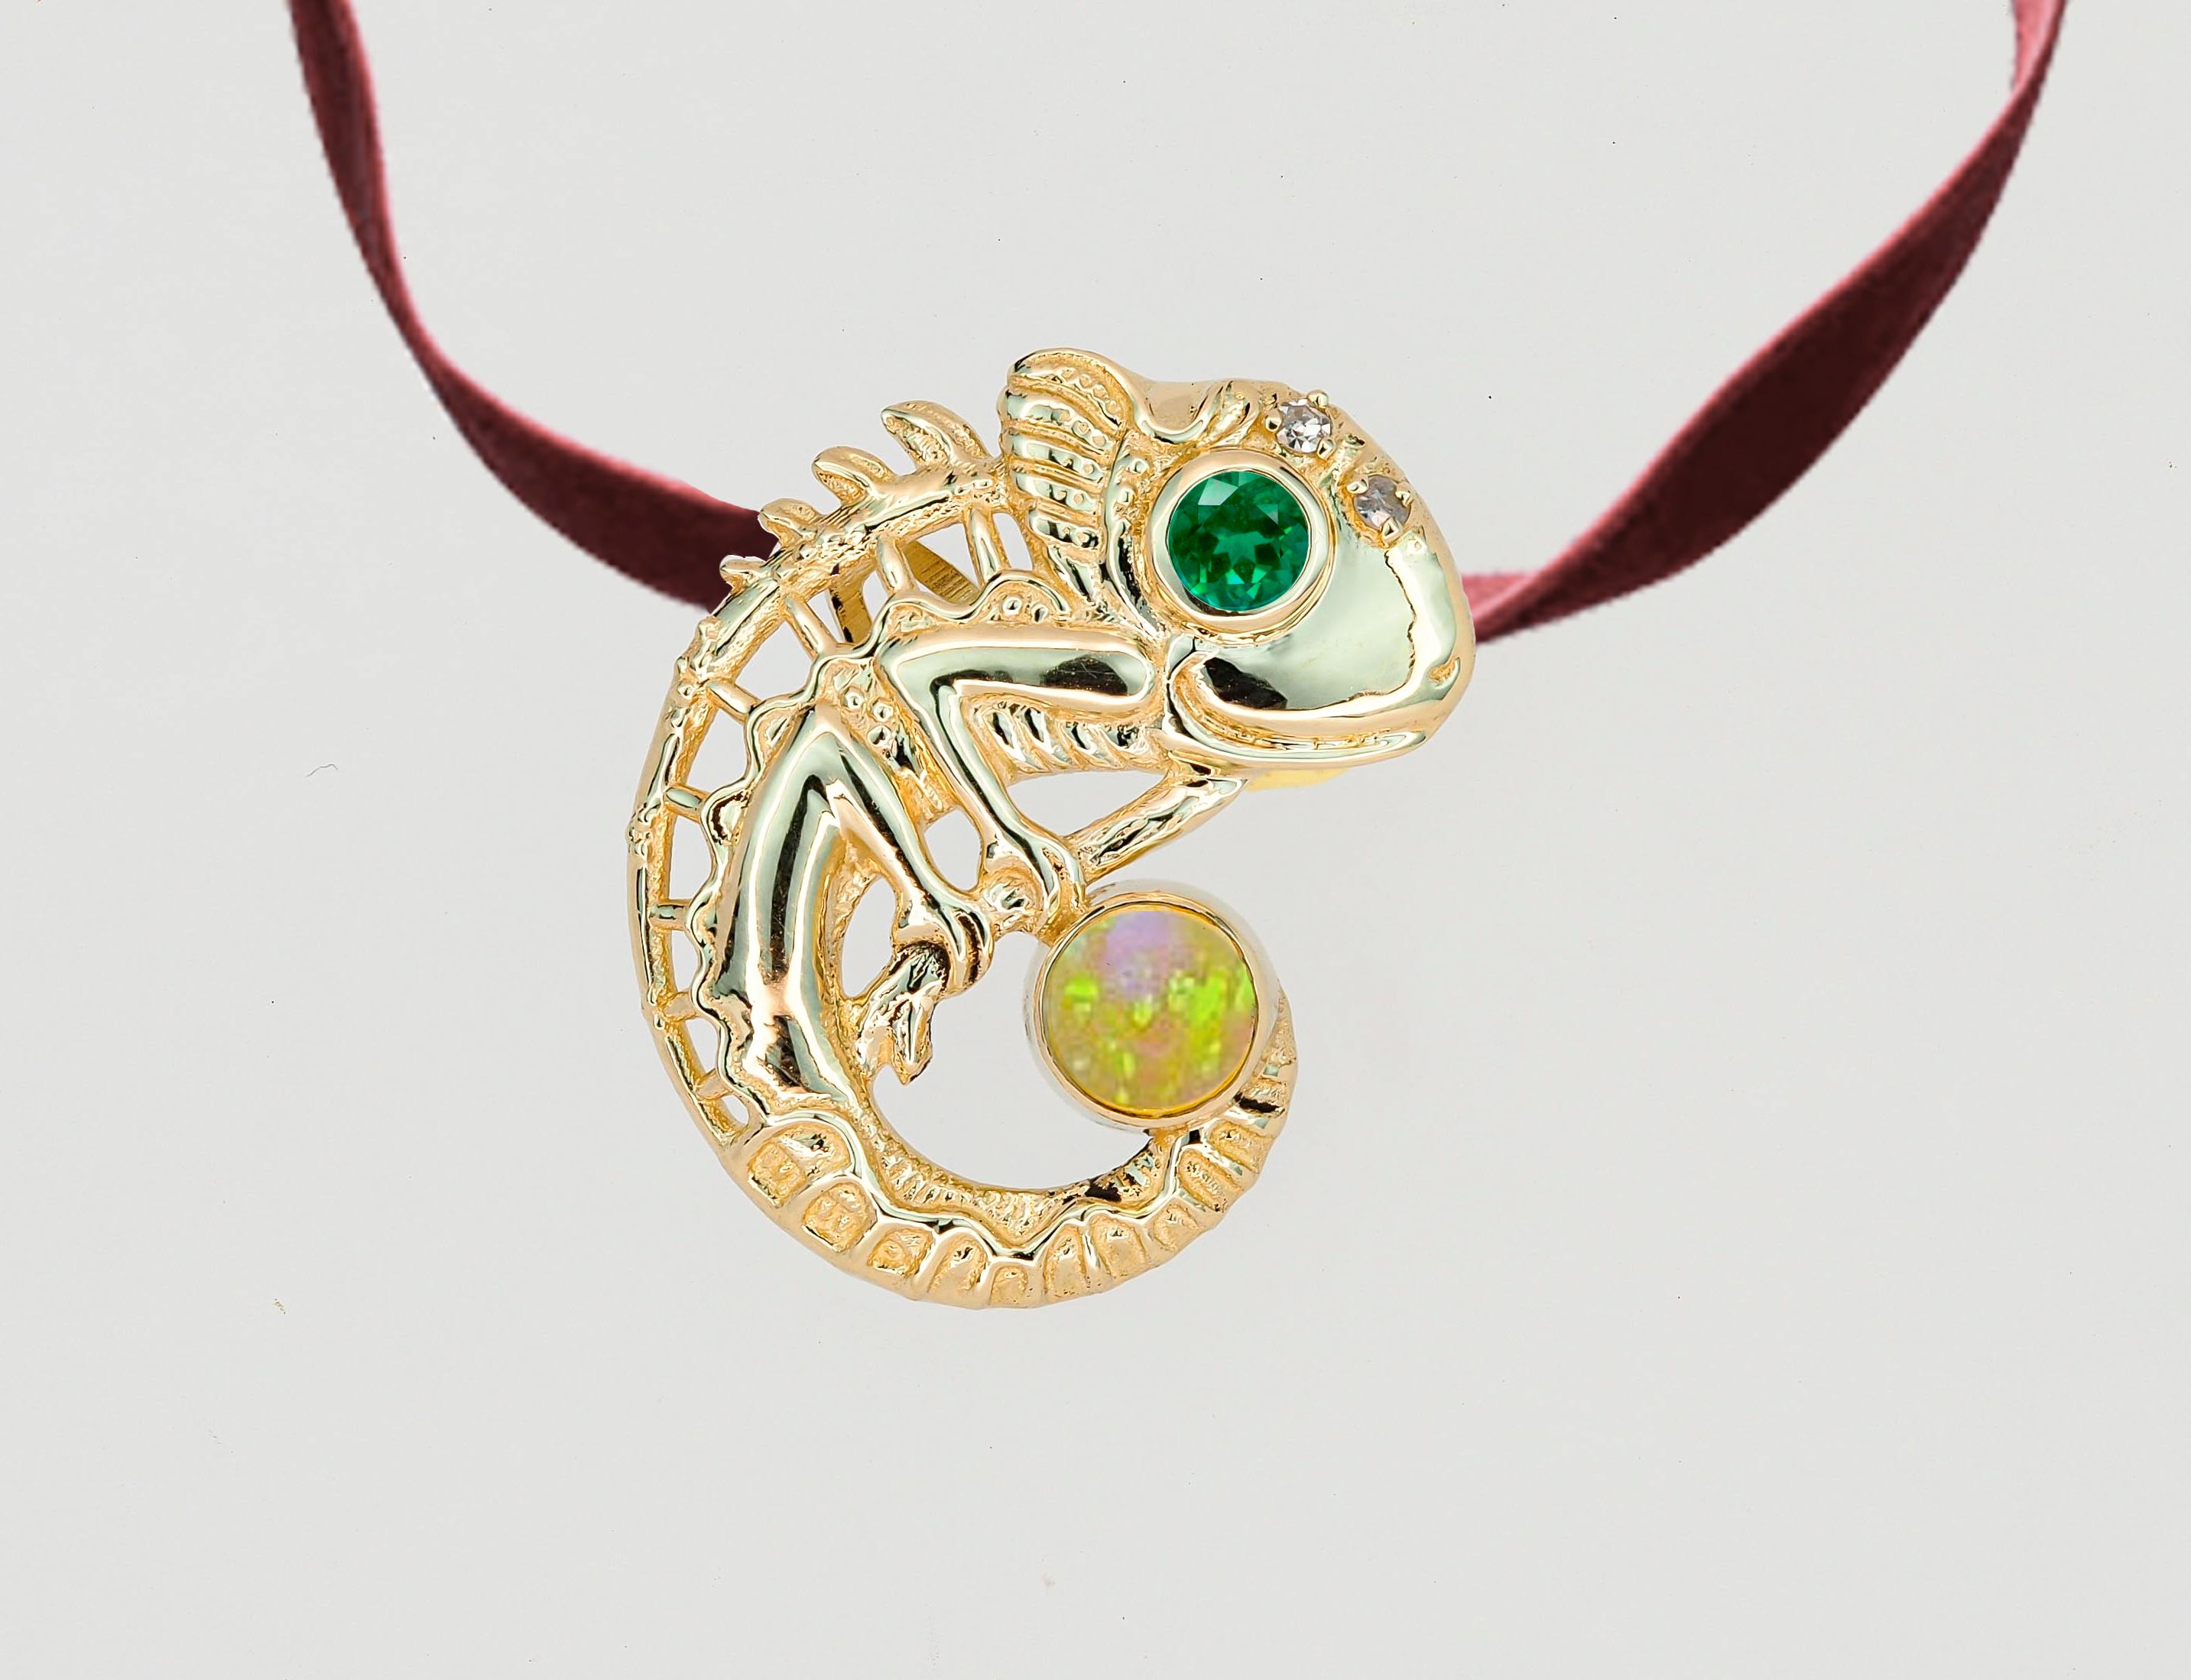 Modern Chameleon pendant with opal, emerald and diamonds in 14k Gold.  For Sale